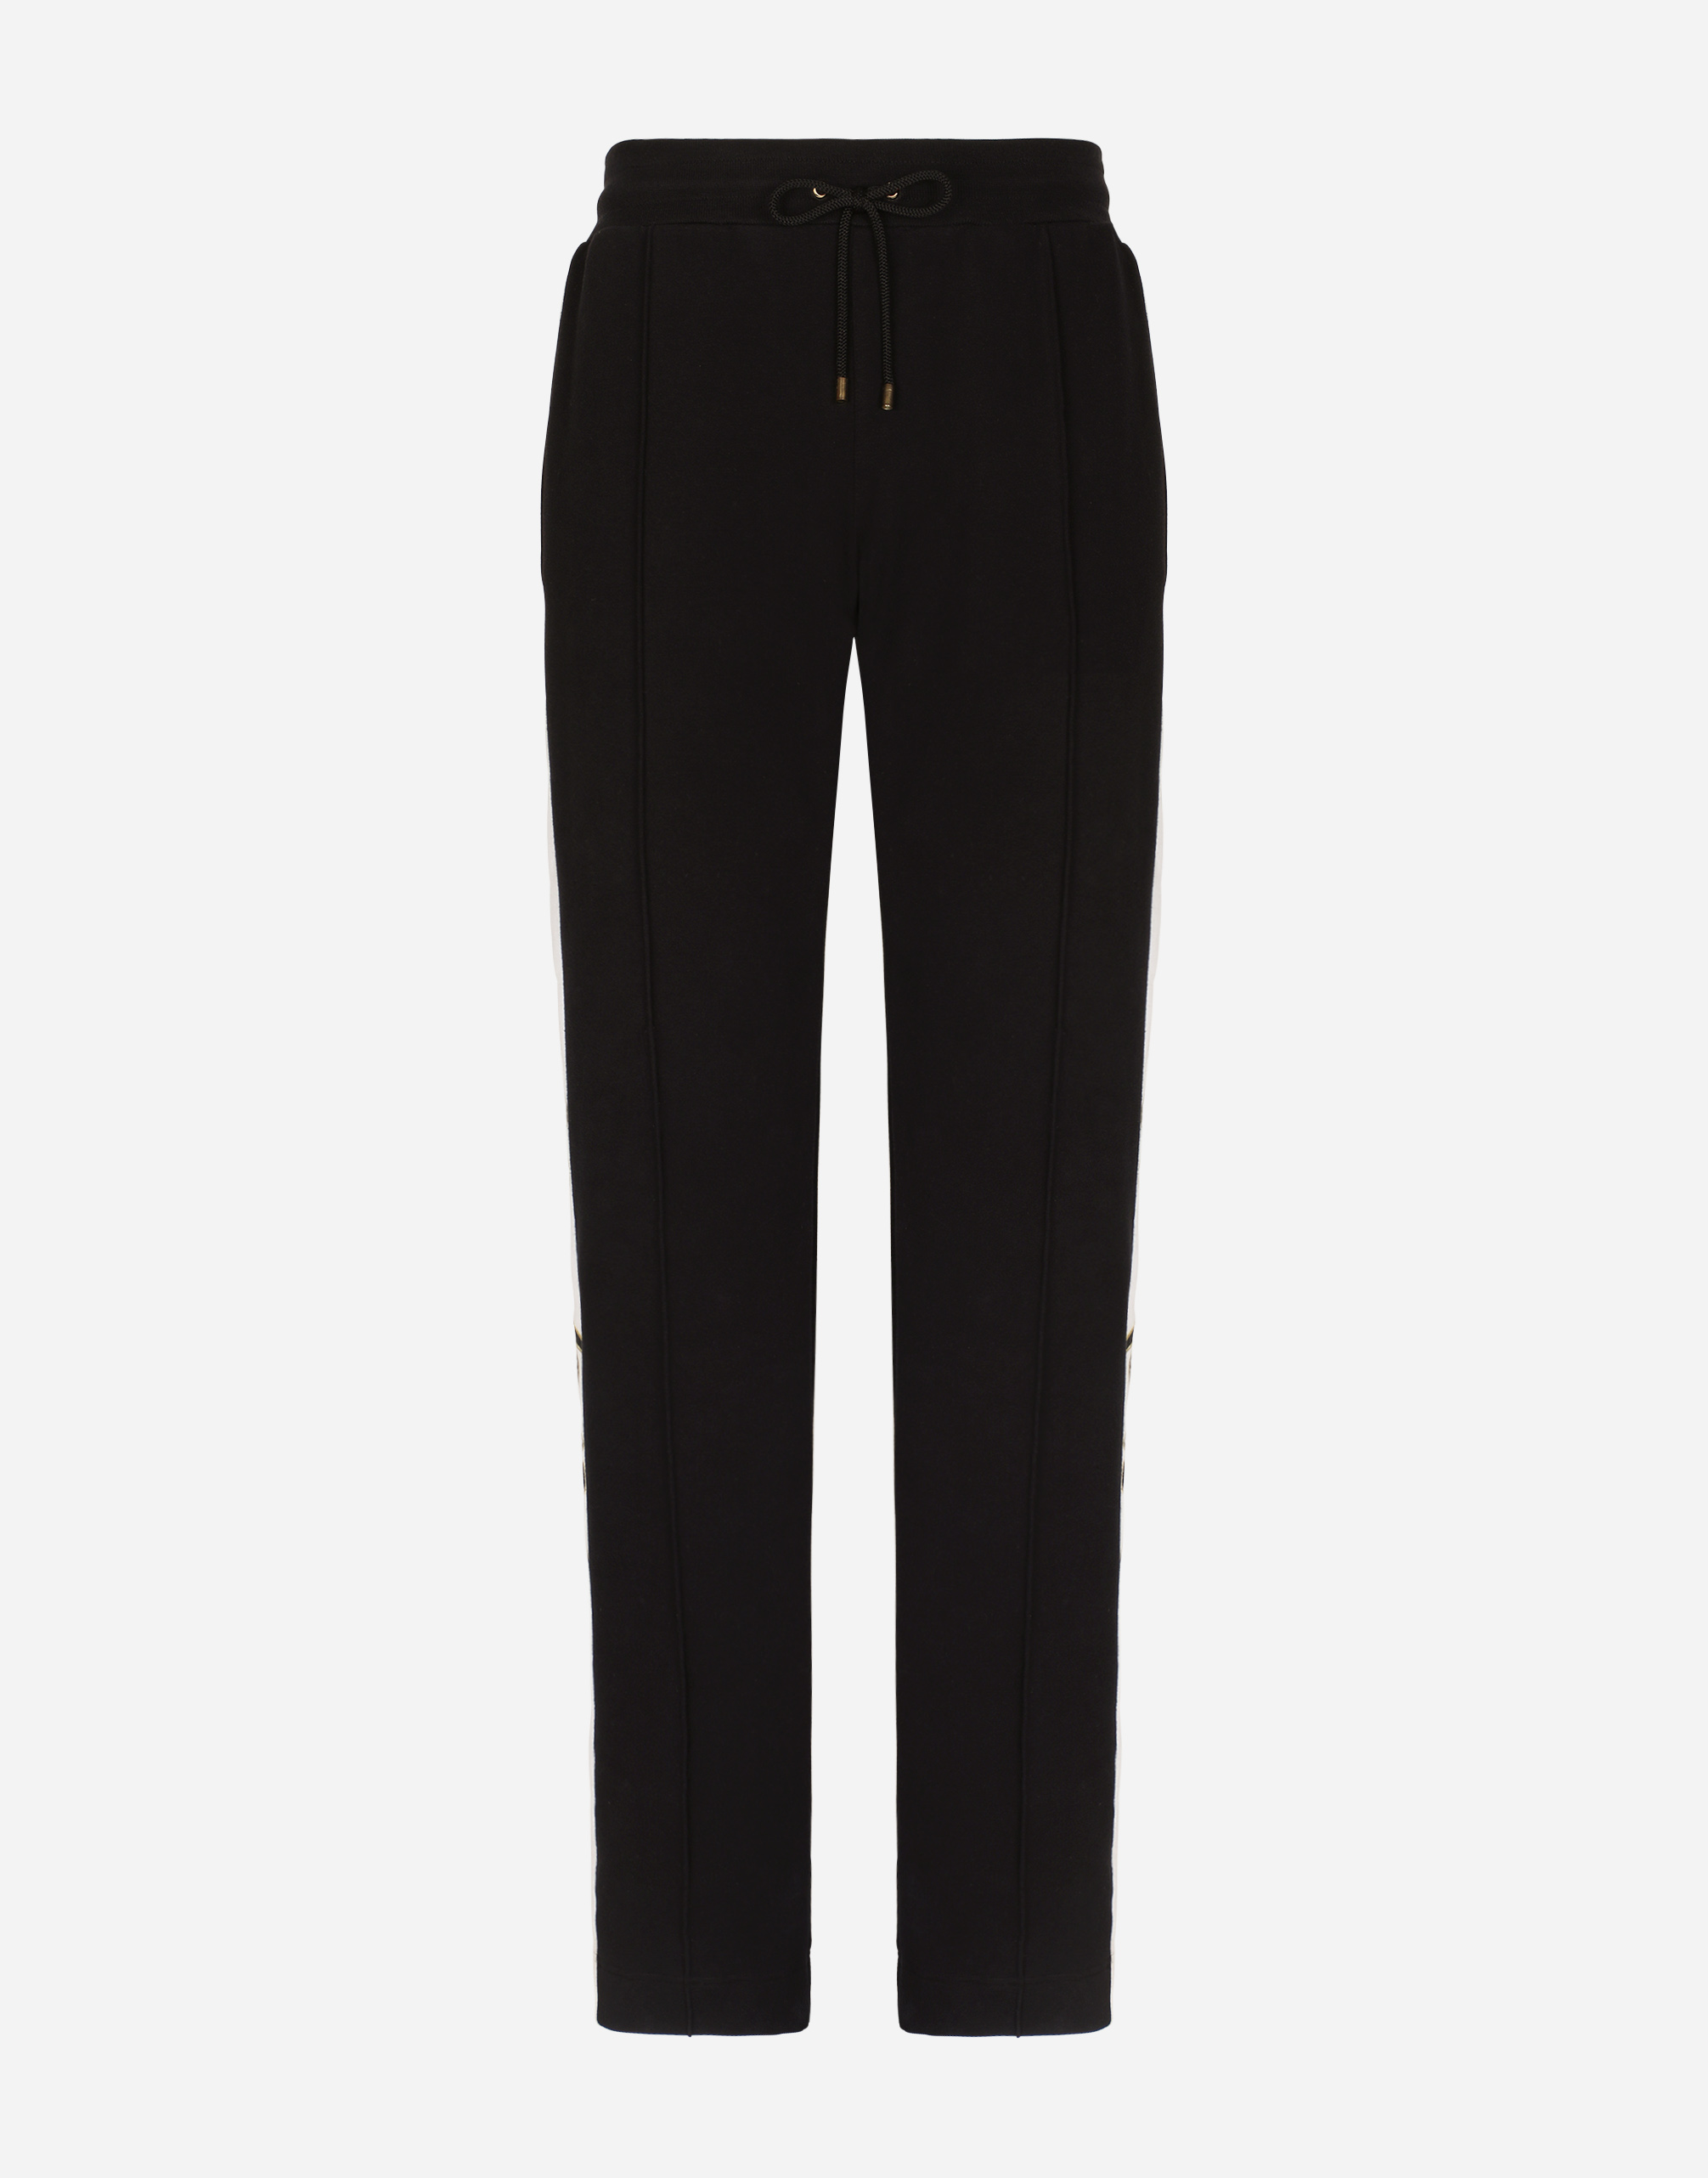 Dolce & Gabbana Jersey Jogging Pants With Embroidered Bands In Black